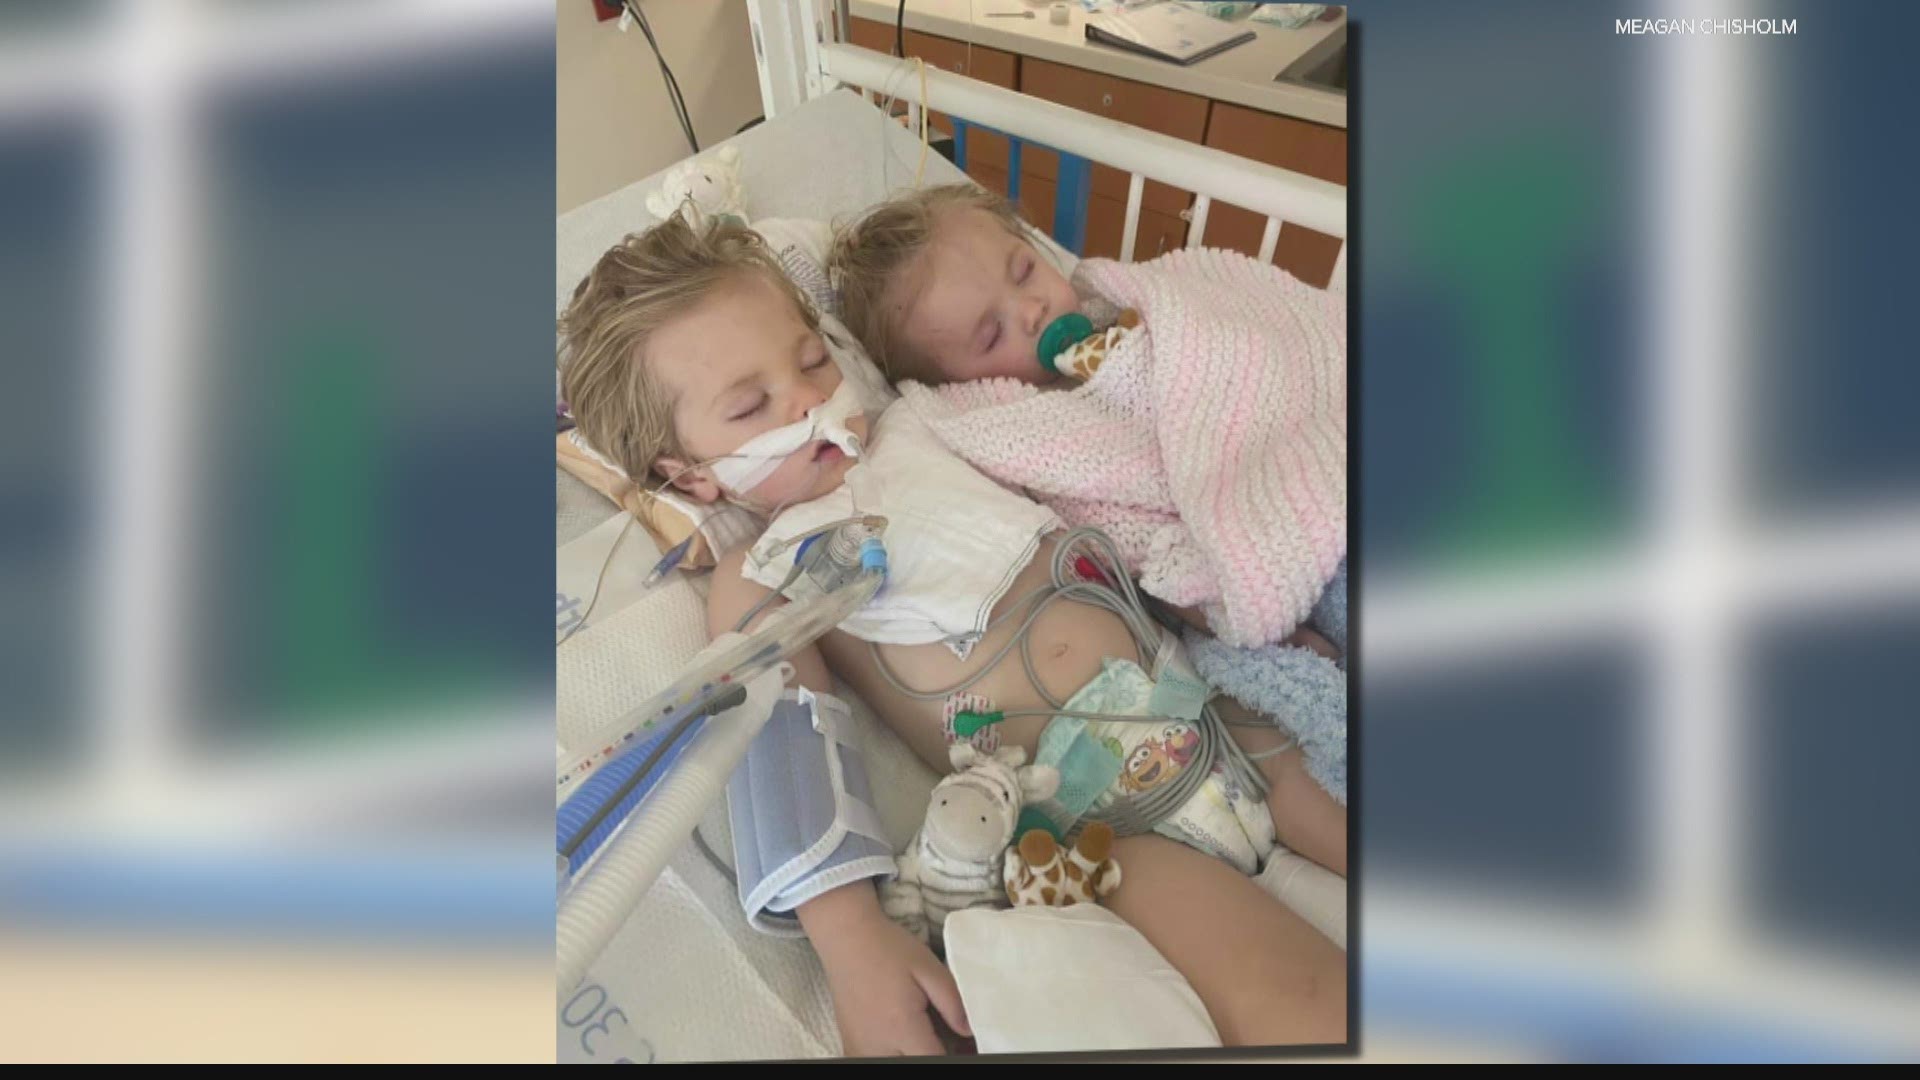 Strangers from across the world are praying for twins as they recover from a near drowning incident.